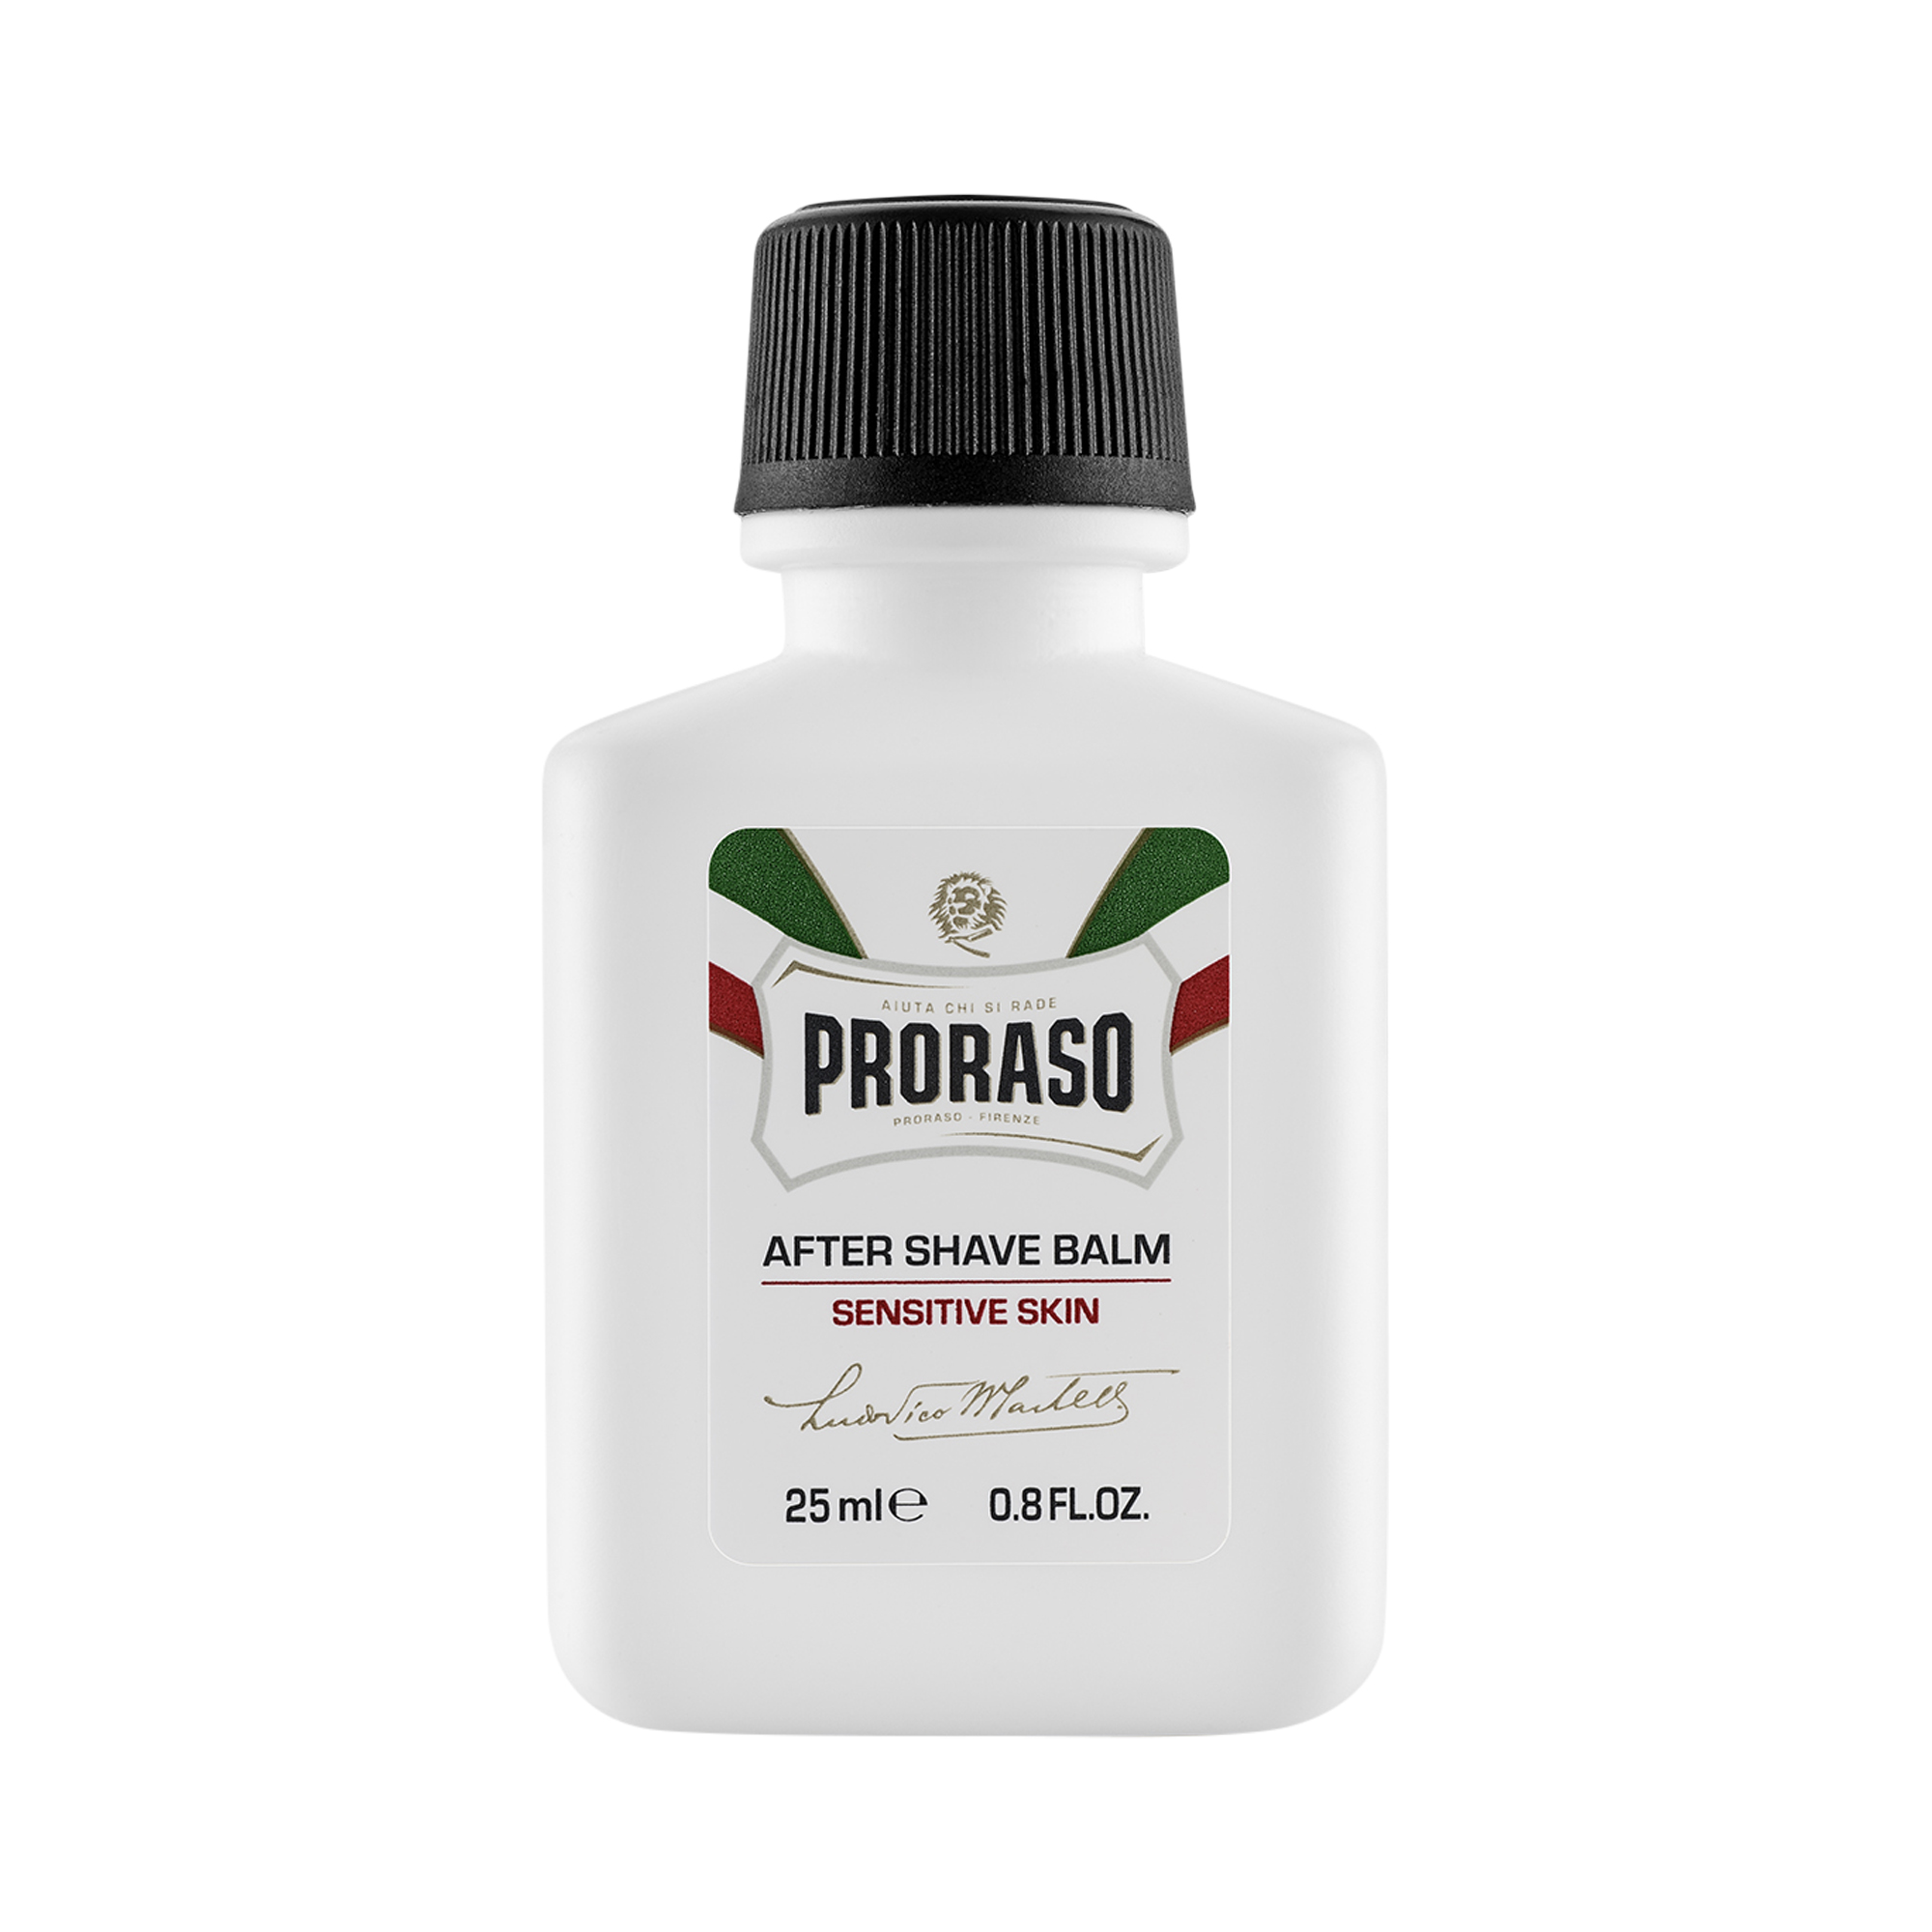 Proraso - After Shave Balm - WHITE - TRAVEL